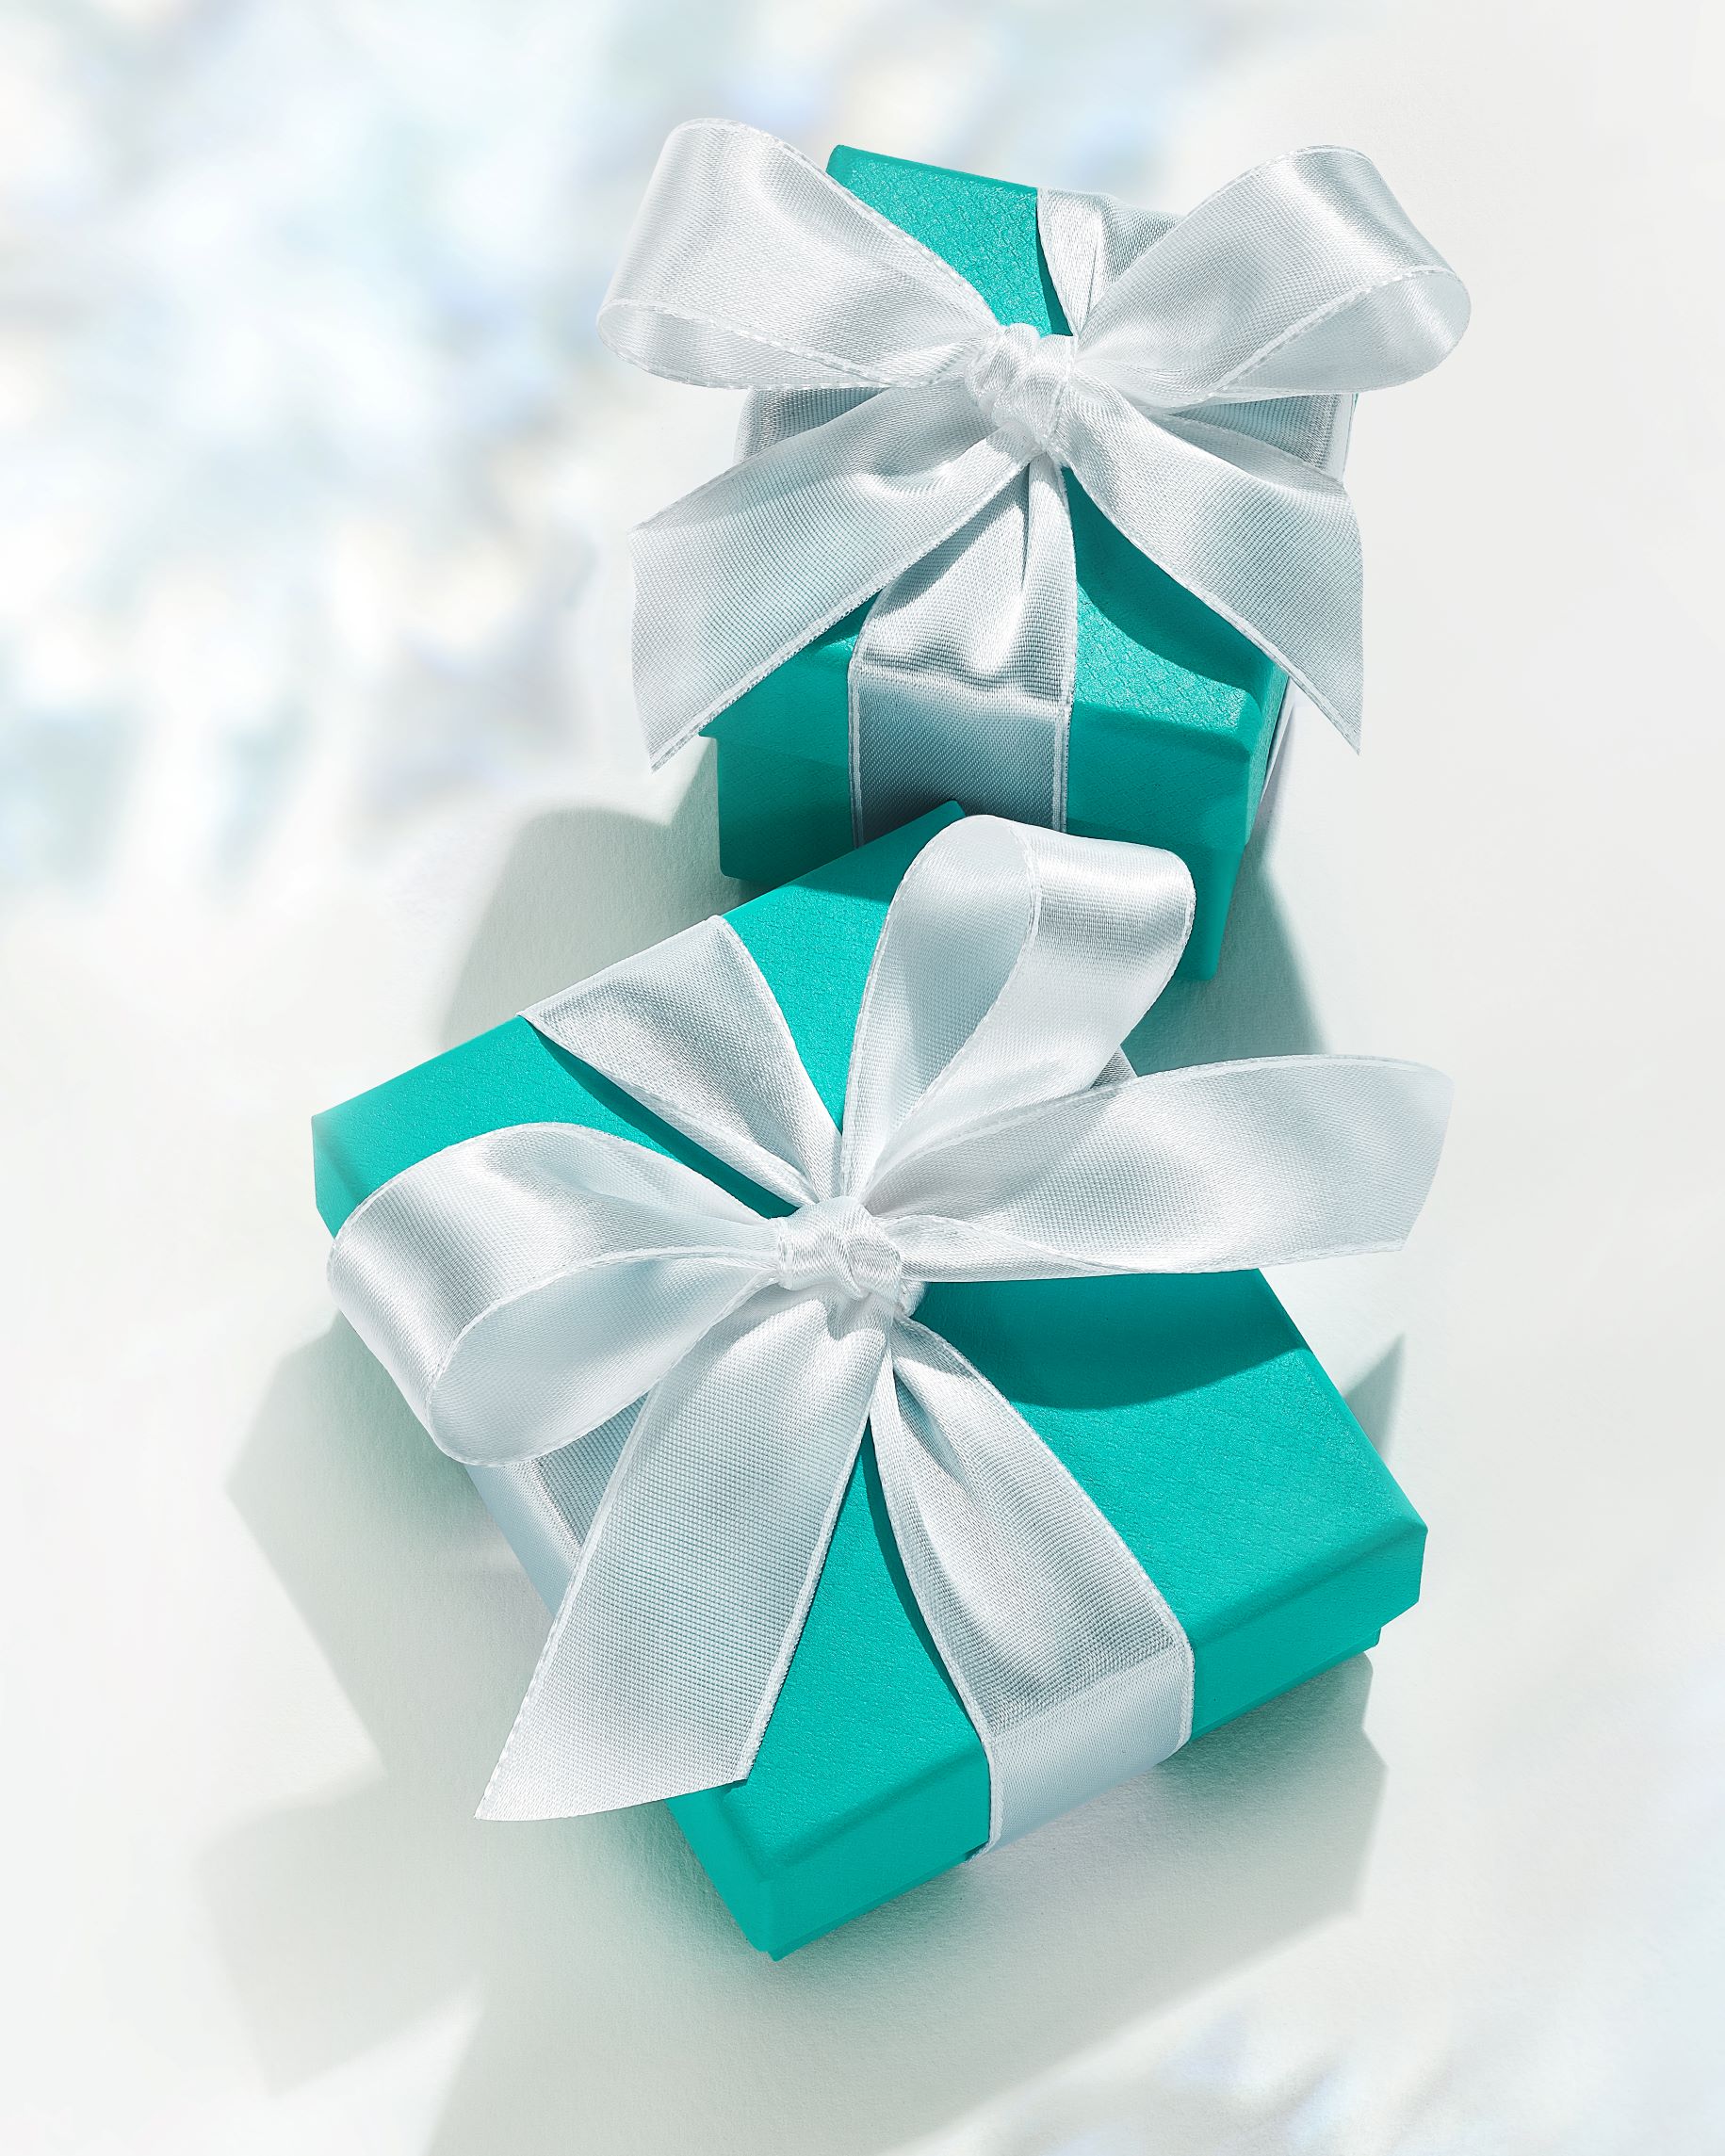 This Holiday Season, Unwrap Joy and Possibilities In the Tiffany Blue® Boxes!